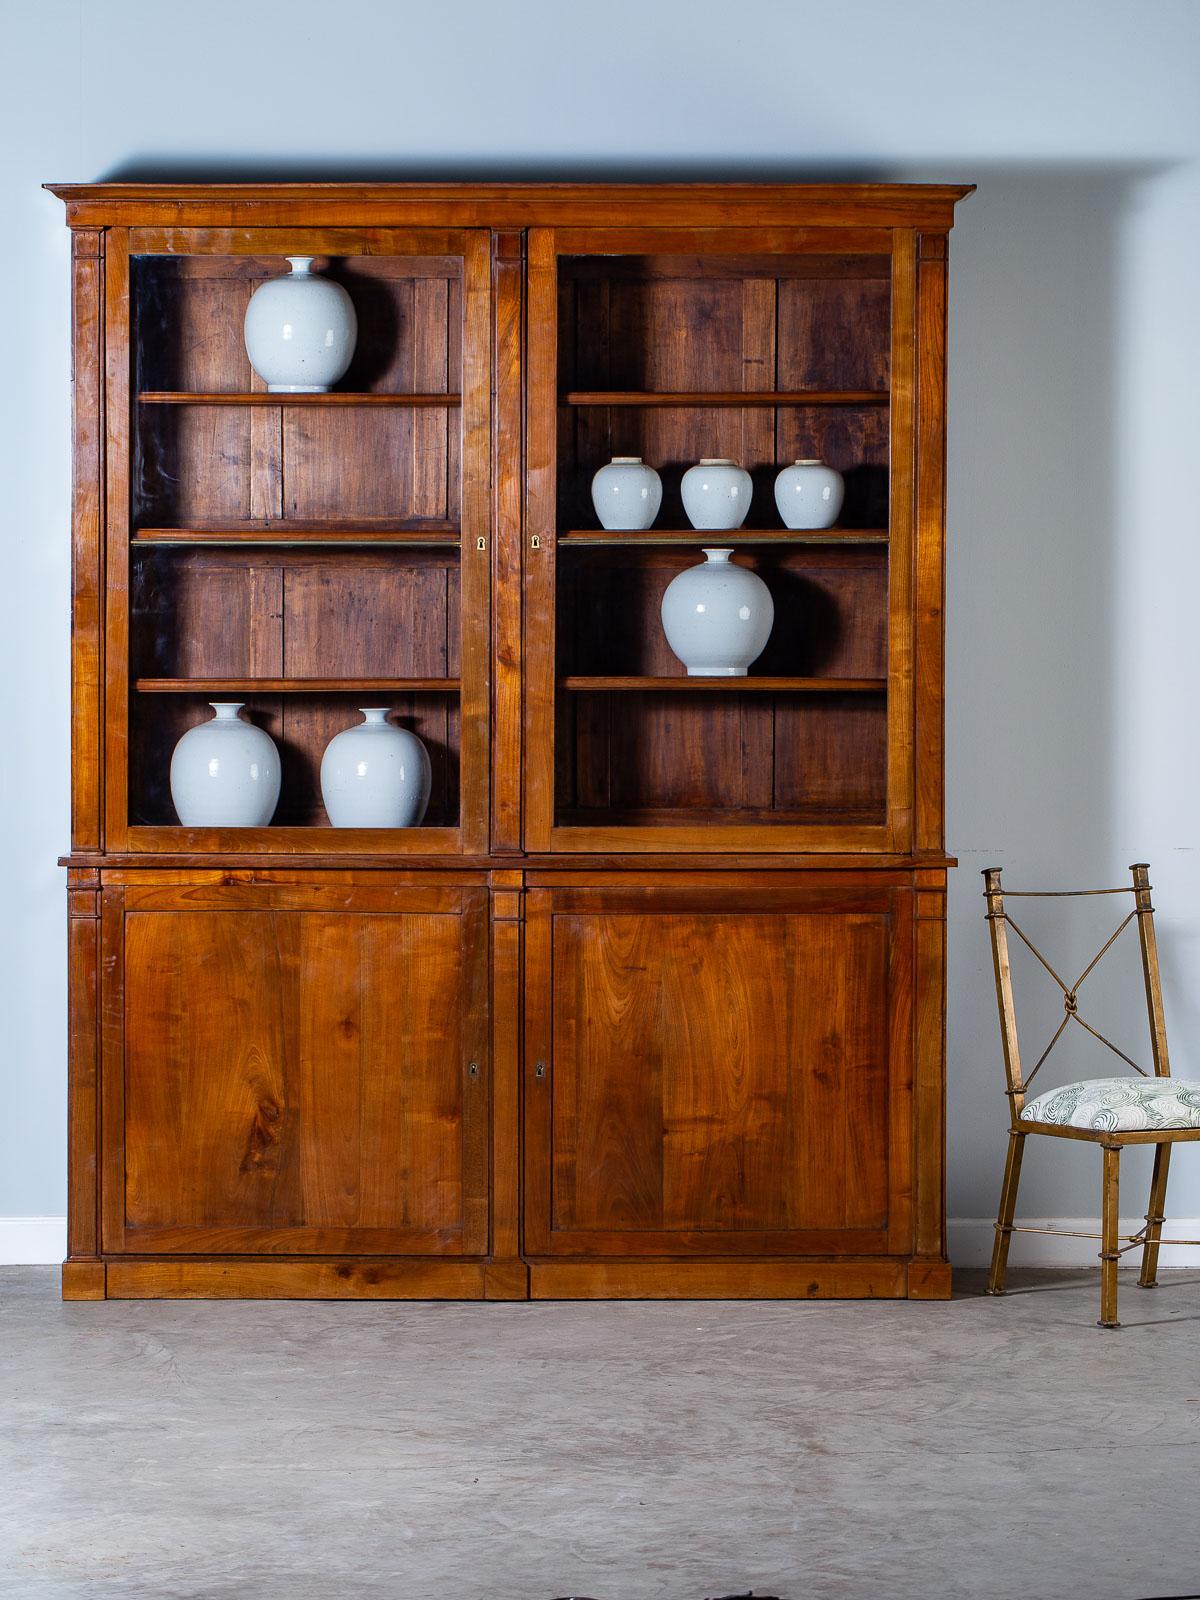 A superb antique French Empire Directoire period cherry bookcase bibliotheque display cabinet circa 1800. Please enlarge the photographs to see, in detail, the elegant simplicity of this French bookcase. Carefully chosen timber, an eye for design